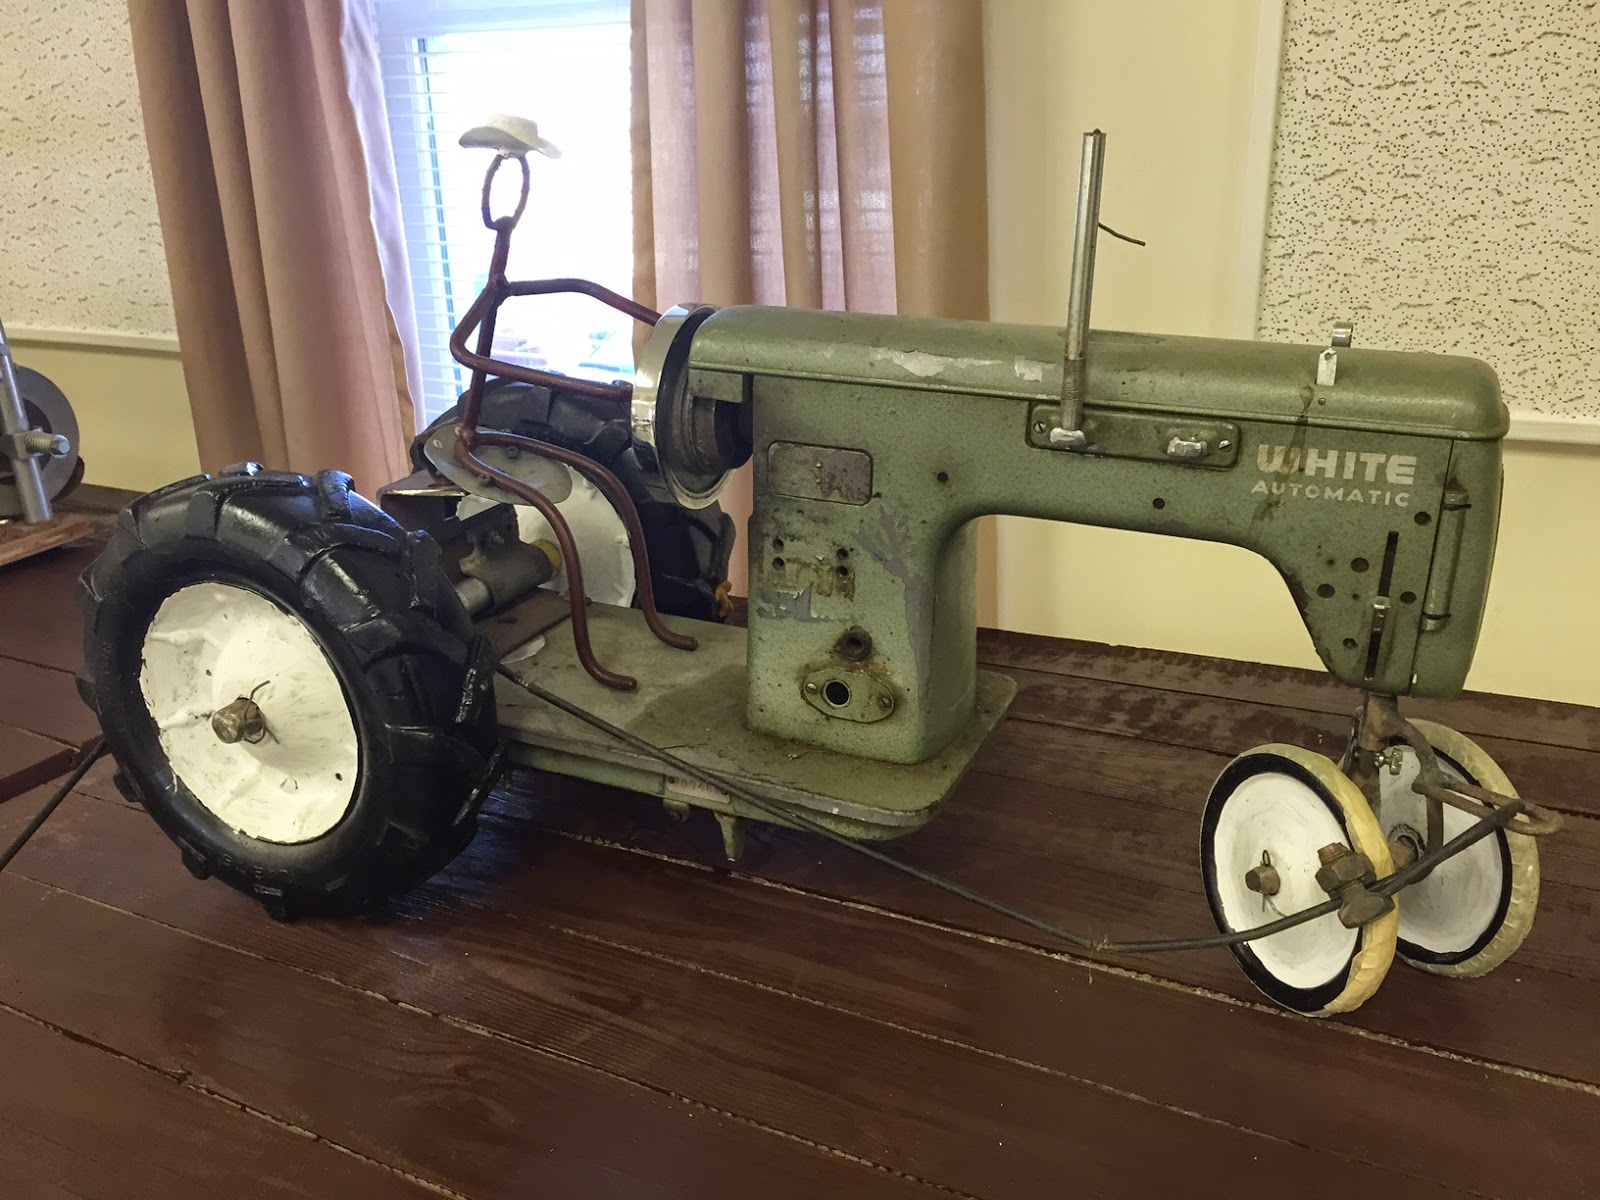 A tractor made from a sewing machine, crafted by Ivan Dodds of rural Butler...